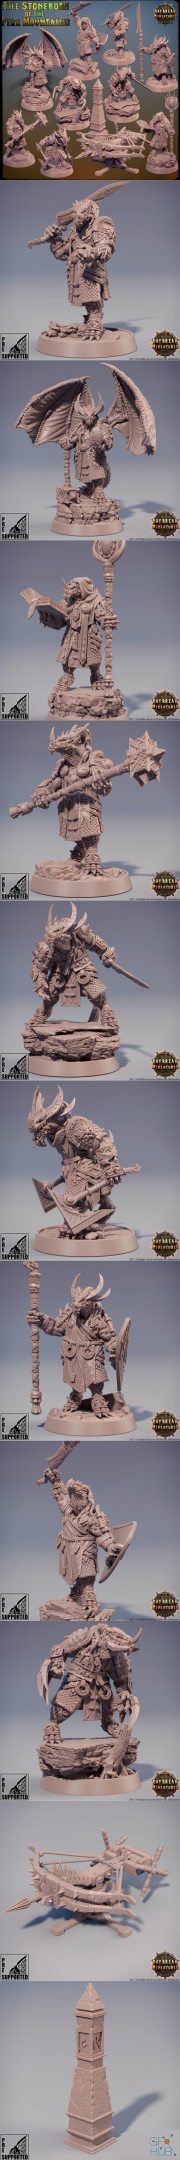 The Stoneborn of the Fire Mountains – 3D Print